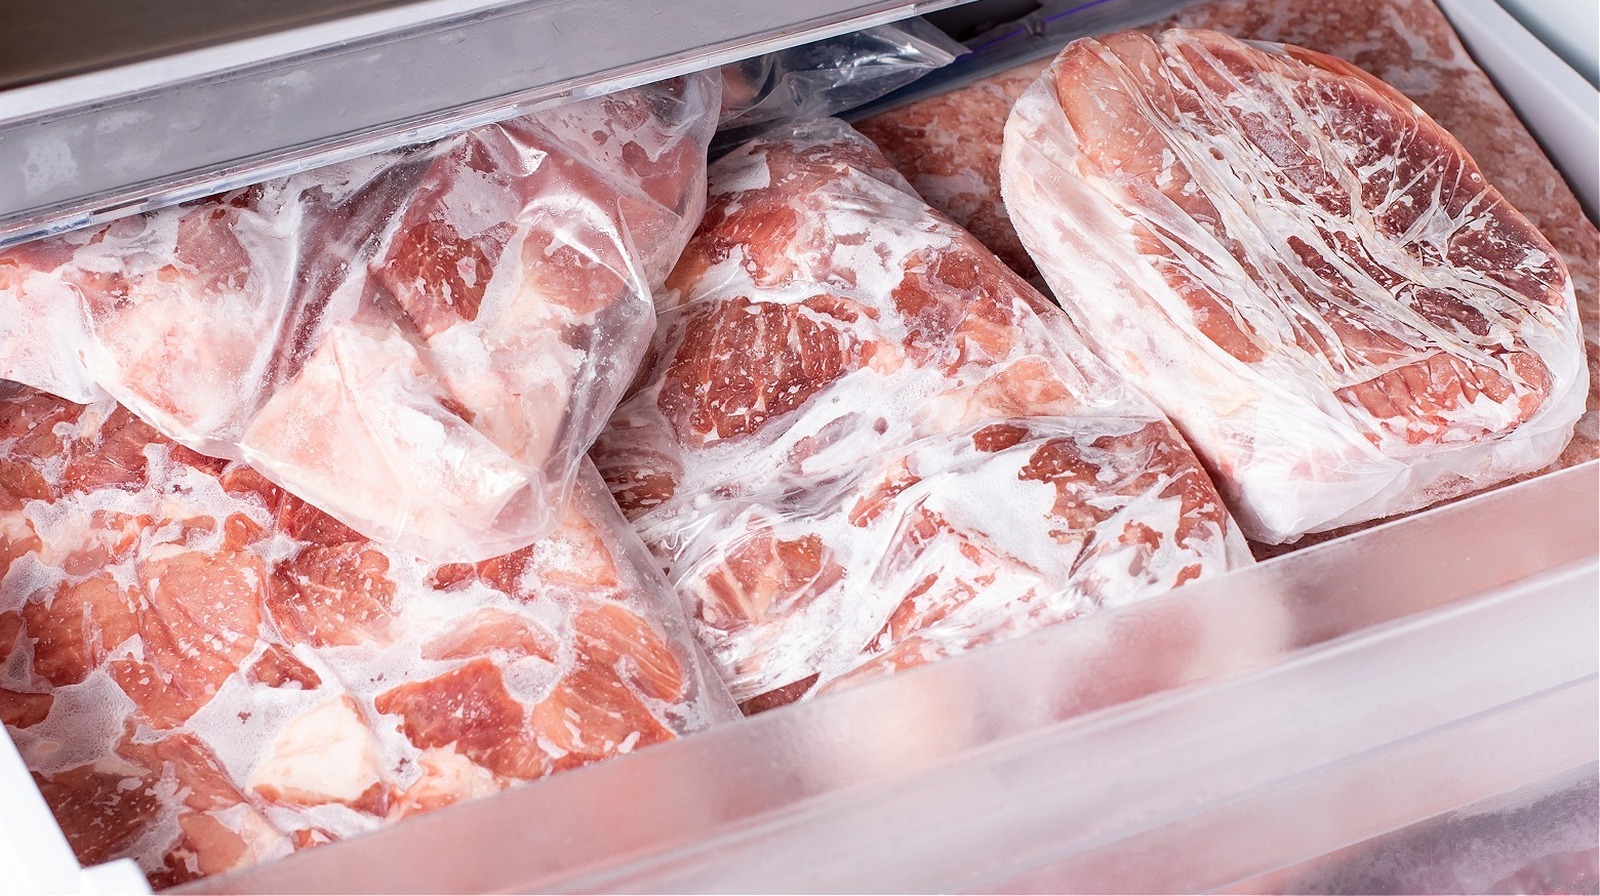 How Long Can You Keep Meat In The Freezer?